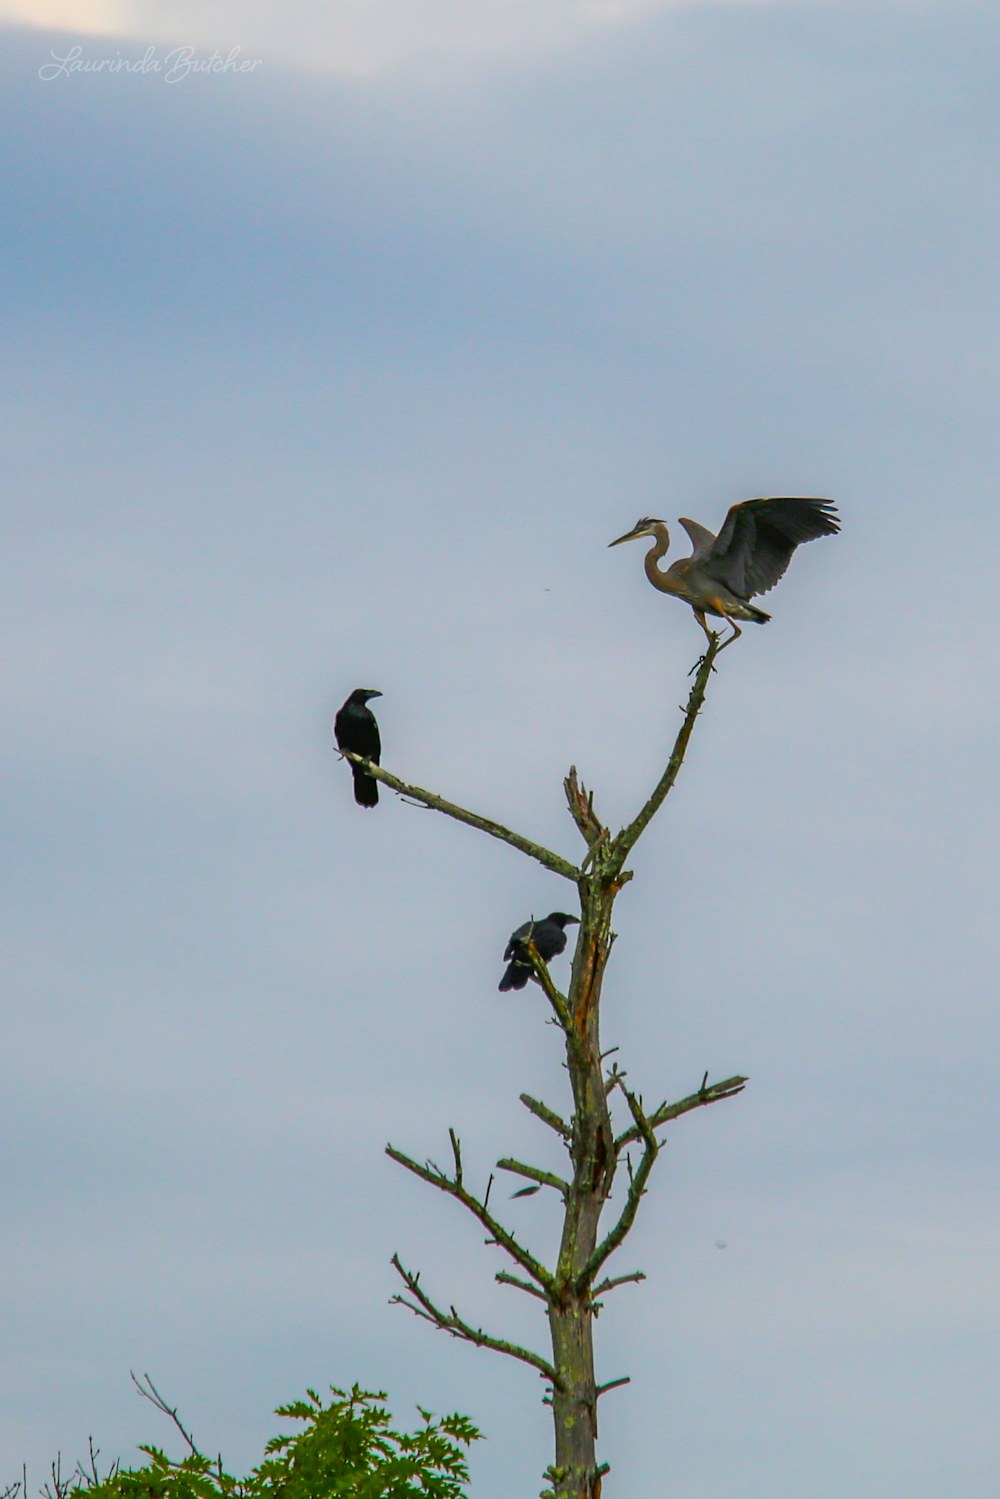 Two crows atop a tree with a Great Blue Heron landing on a nearby branch.